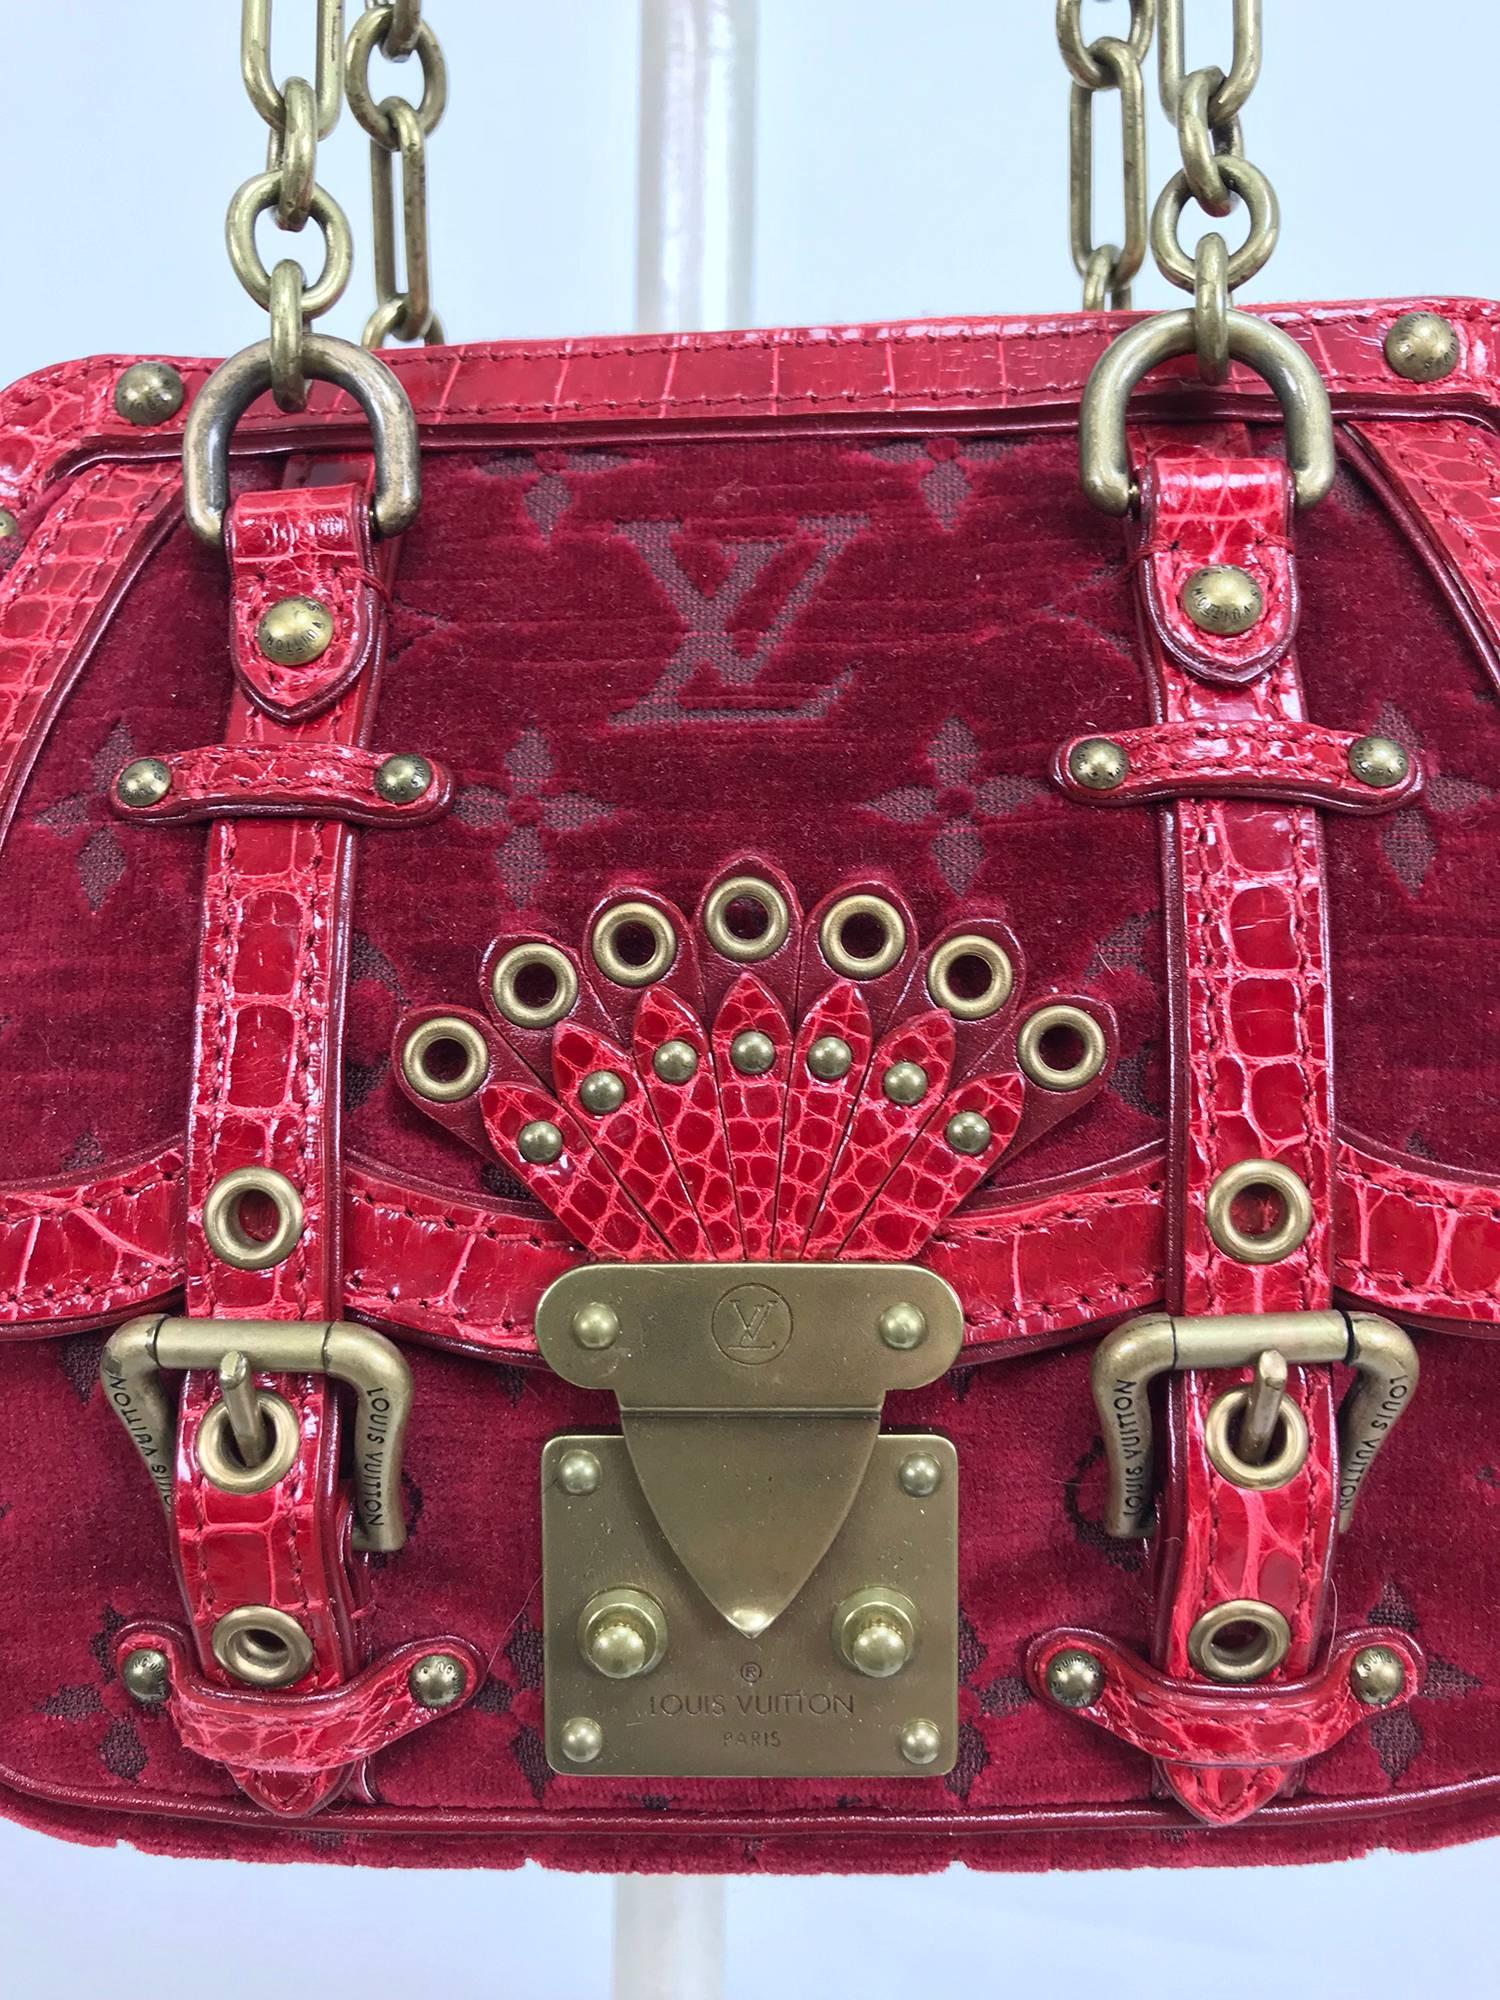 Louis Vuitton Velours Alligator Gracie PM was a limited edition piece from the Fall/Winter 2004 Runway Collection. Monogrammed rich red velvet is luxuriously trimmed in red alligator. Hardware has a patina finish that compliments the design of the